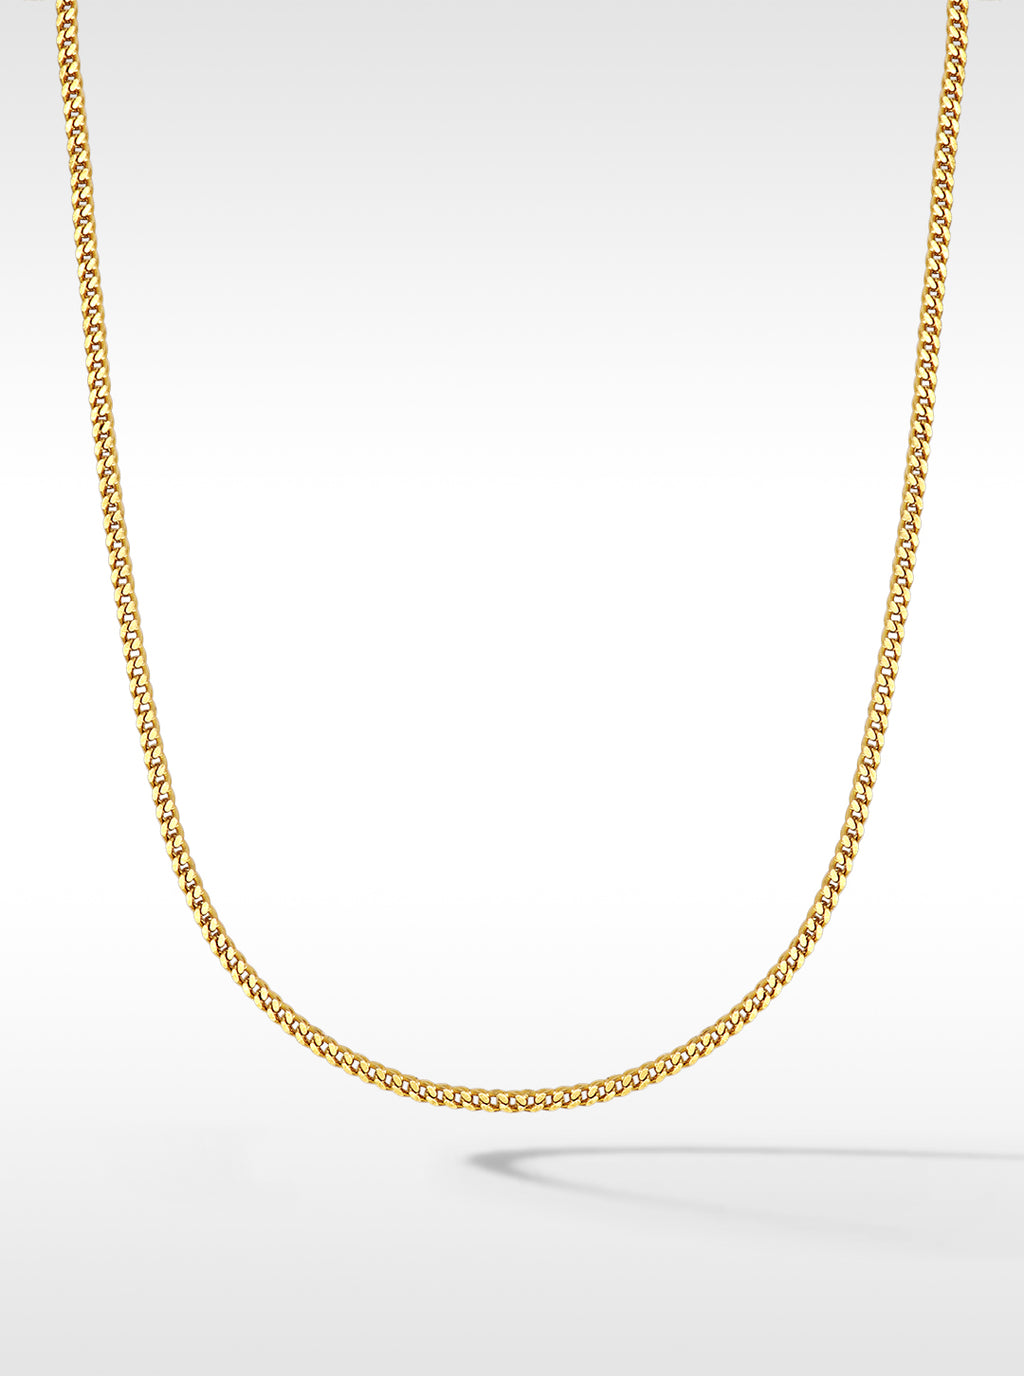 franco style gold tone necklace for men